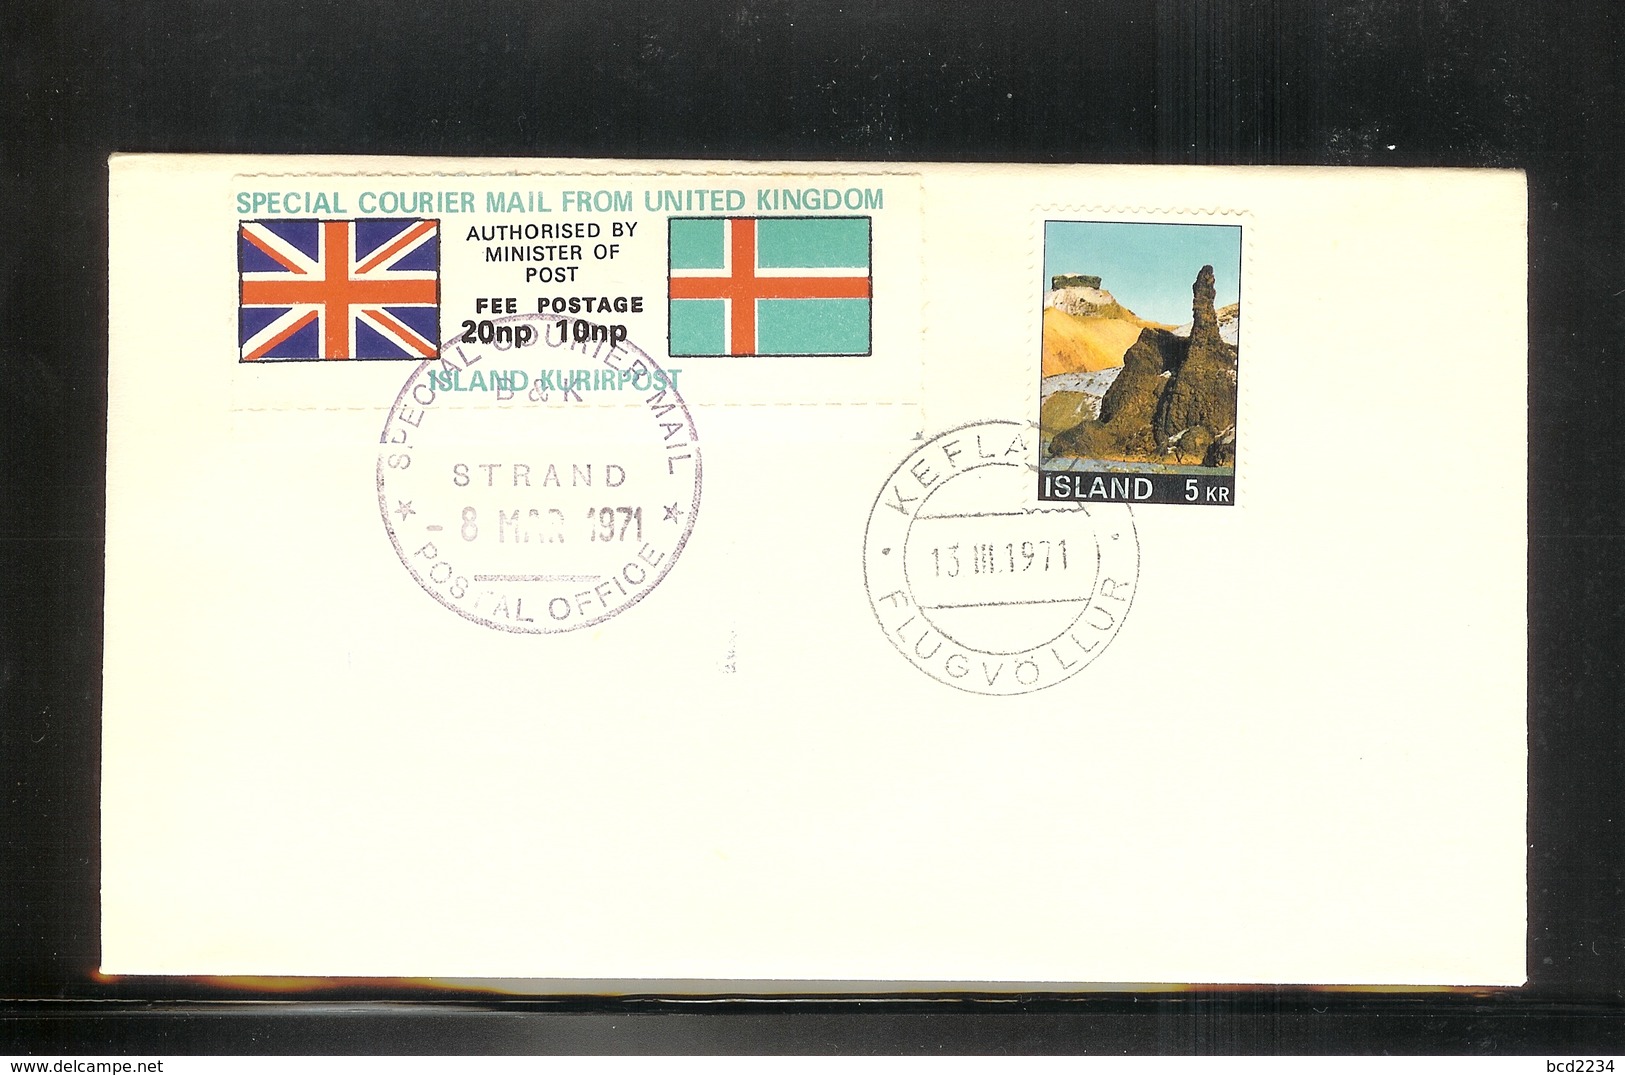 GREAT BRITAIN GB 1971 POSTAL STRIKE MAIL SPECIAL COURIER MAIL 2ND ISSUE DECIMAL COVER LONDON TO KEFLAVIK ICELAND 8 MARCH - Ongetande, Proeven & Plaatfouten